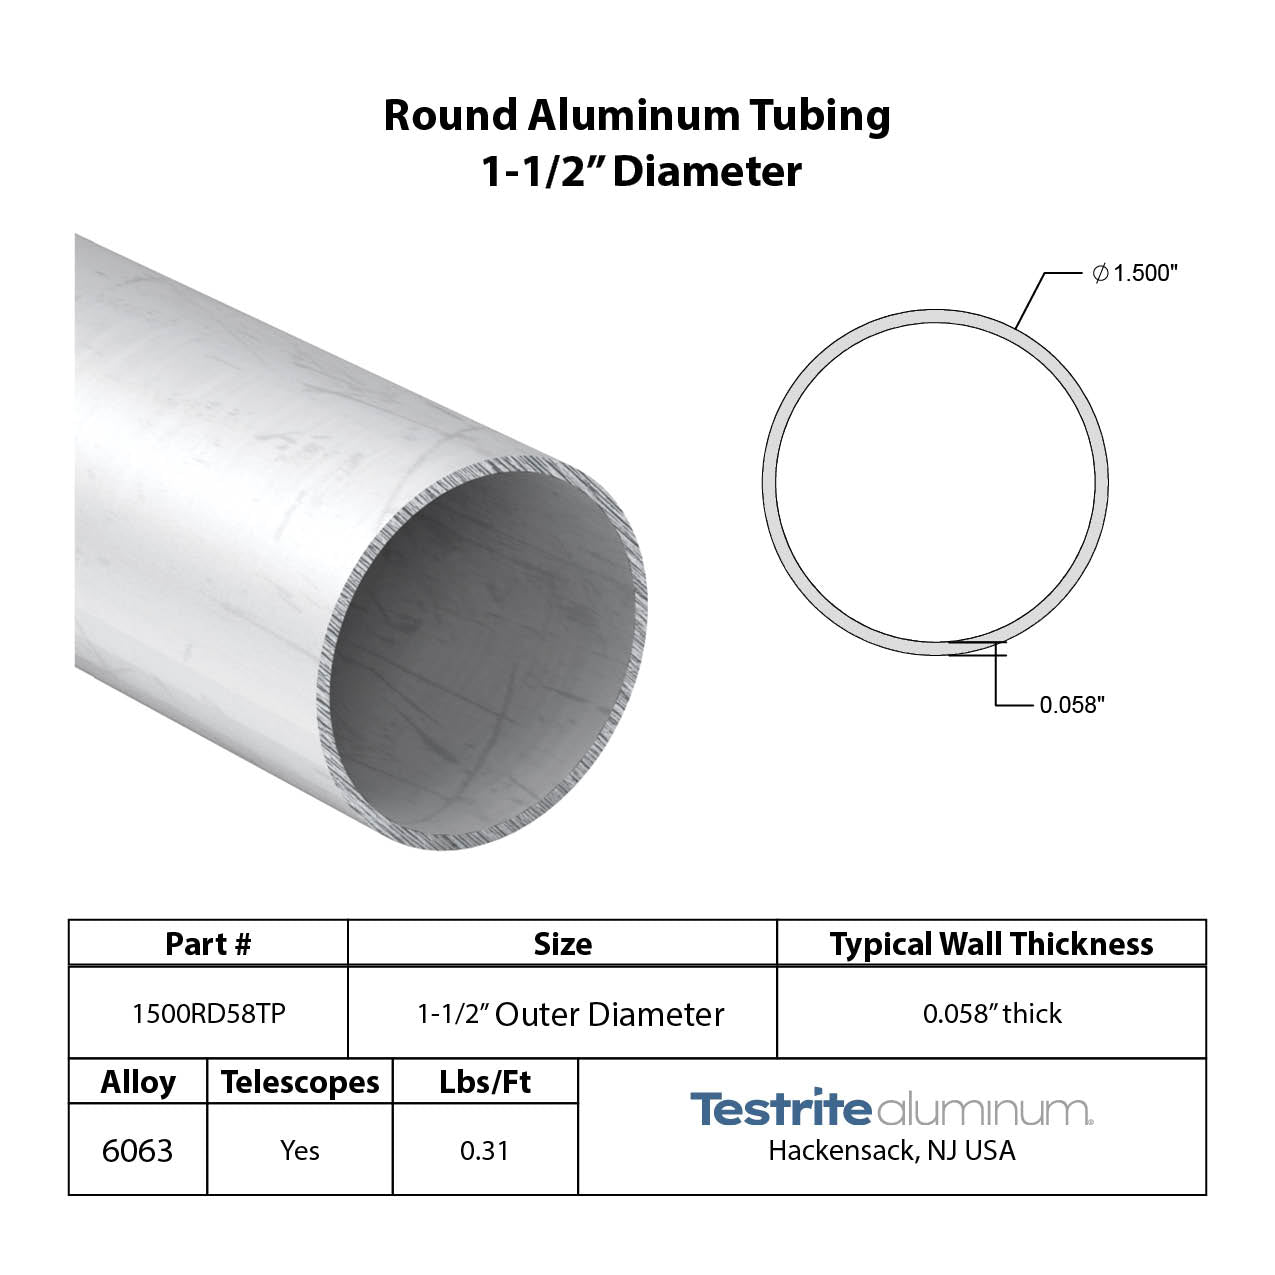 Specifications for 1-1/2" OD x .058" Wall Drawn Round Aluminum Tubing Telescopic, 1.5" OD x .058" wall round aluminum tube, designed to fit inside our 1-5/8" OD x .058" wall tube and to accept our 1-3/8" OD x .058" Wall tube inside of it, all telescoping compatible